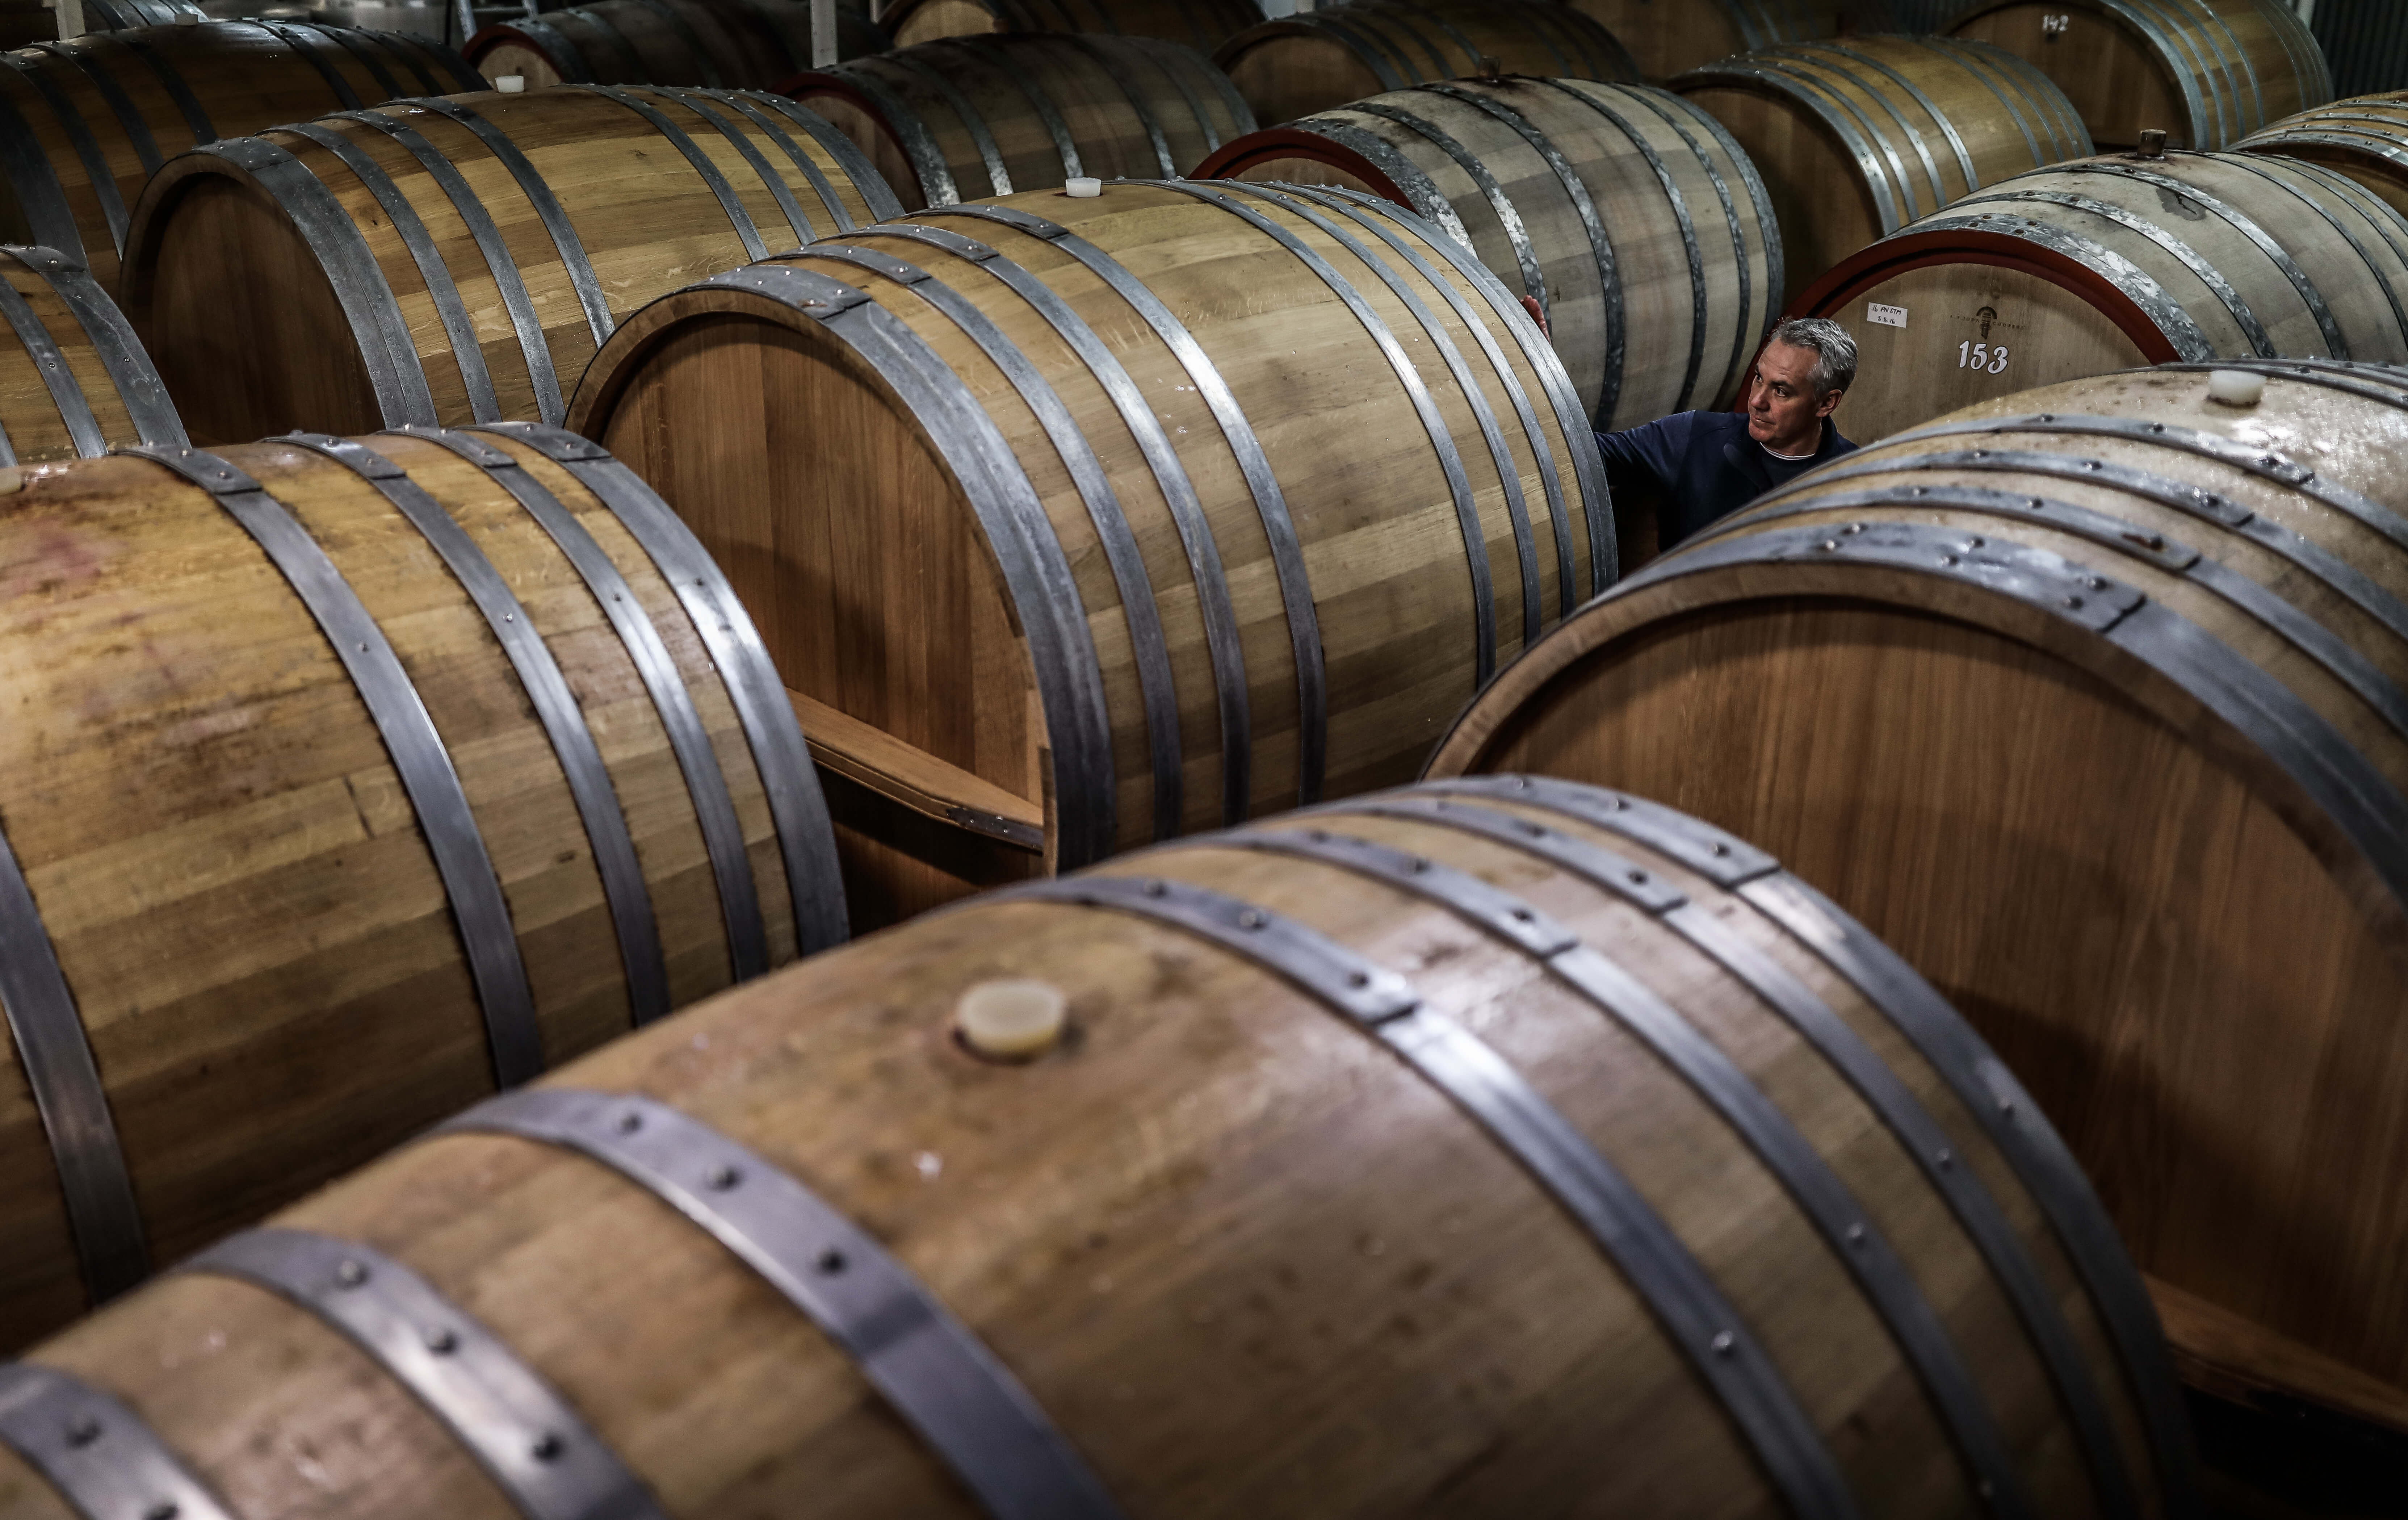 Portrait of a winemaker with wine barrels